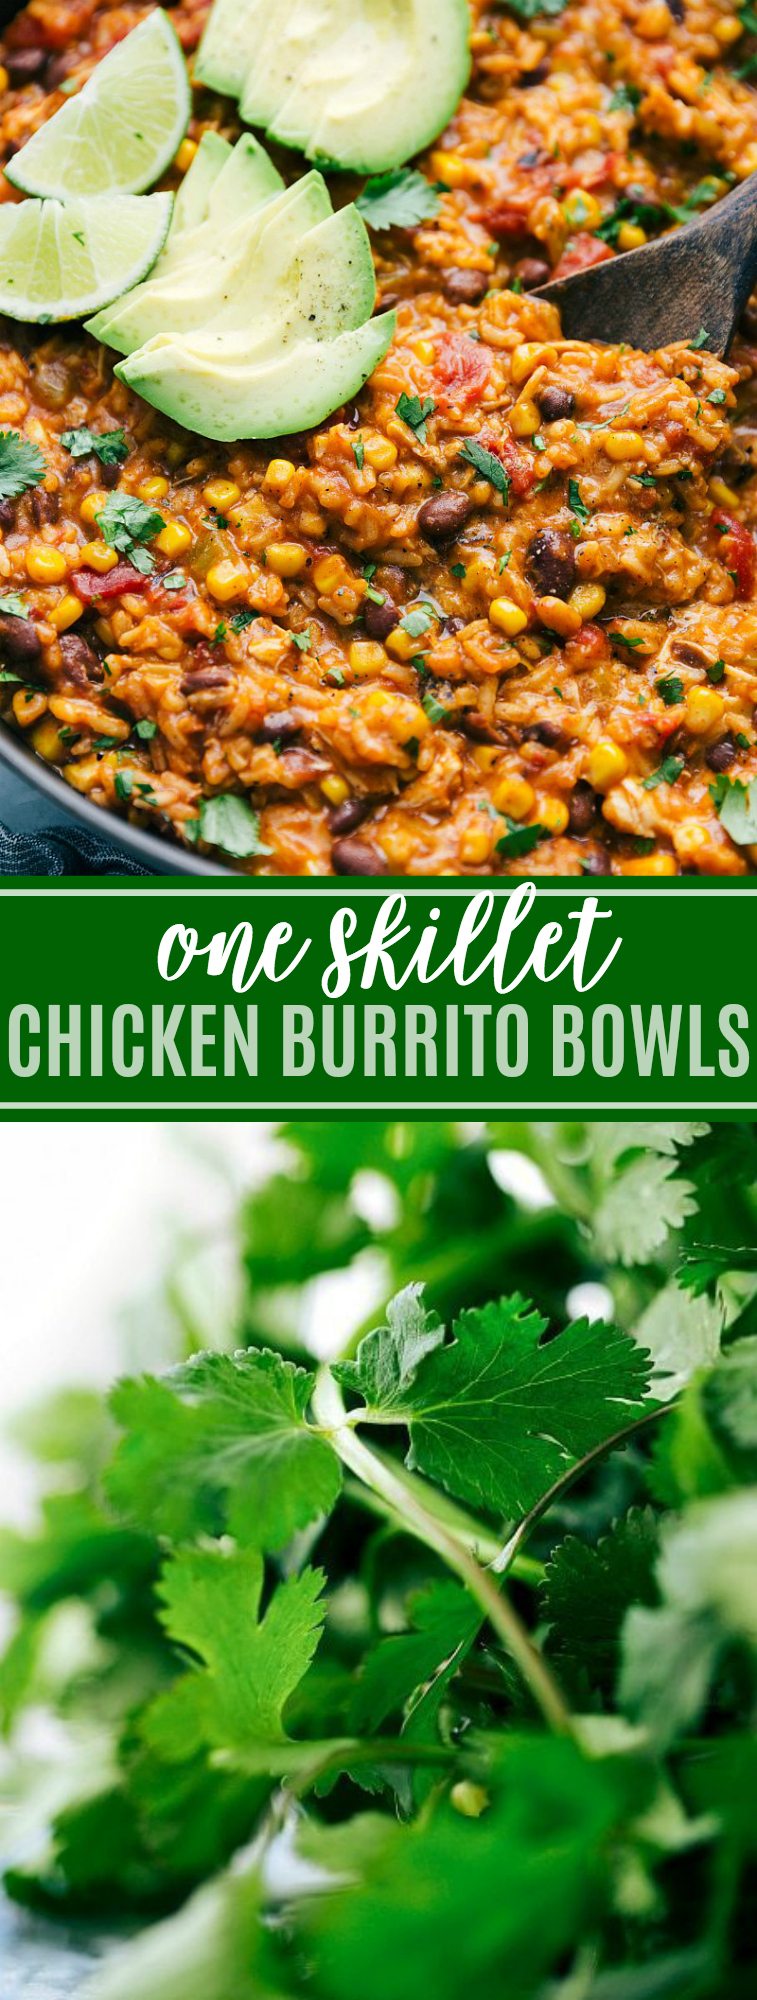 Only ONE SKILLET to make these insanely good chicken burrito bowls. Everyone goes crazy for them and they are so easy to make! via chelseasmessyapron.com #one #skillet #pot #burrito #bowl #easy #quick #avocado #blackbeans #corn #chicken #bowls #sauce #cilantro #kidfriendly